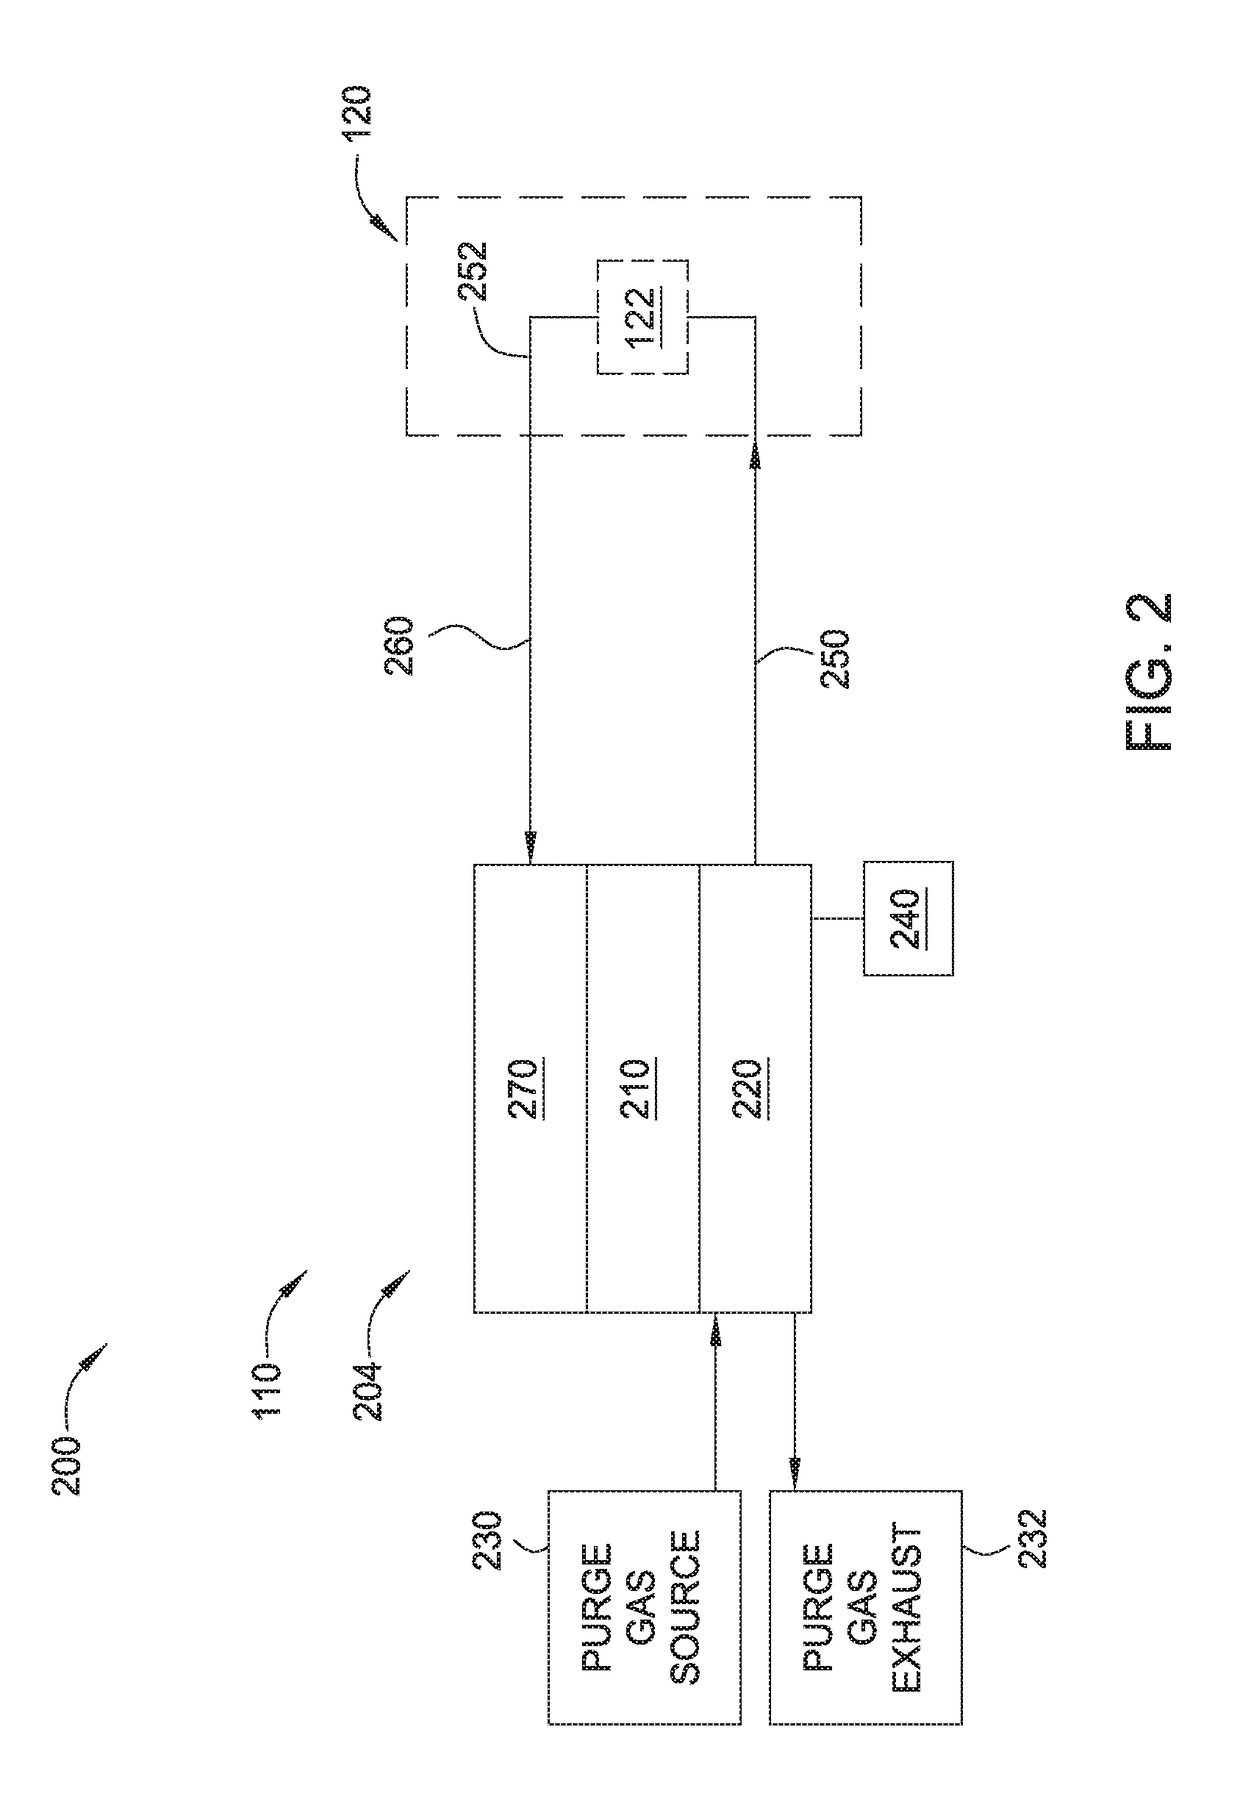 Coolant and a method to control the ph and resistivity of coolant used in a heat exchanger